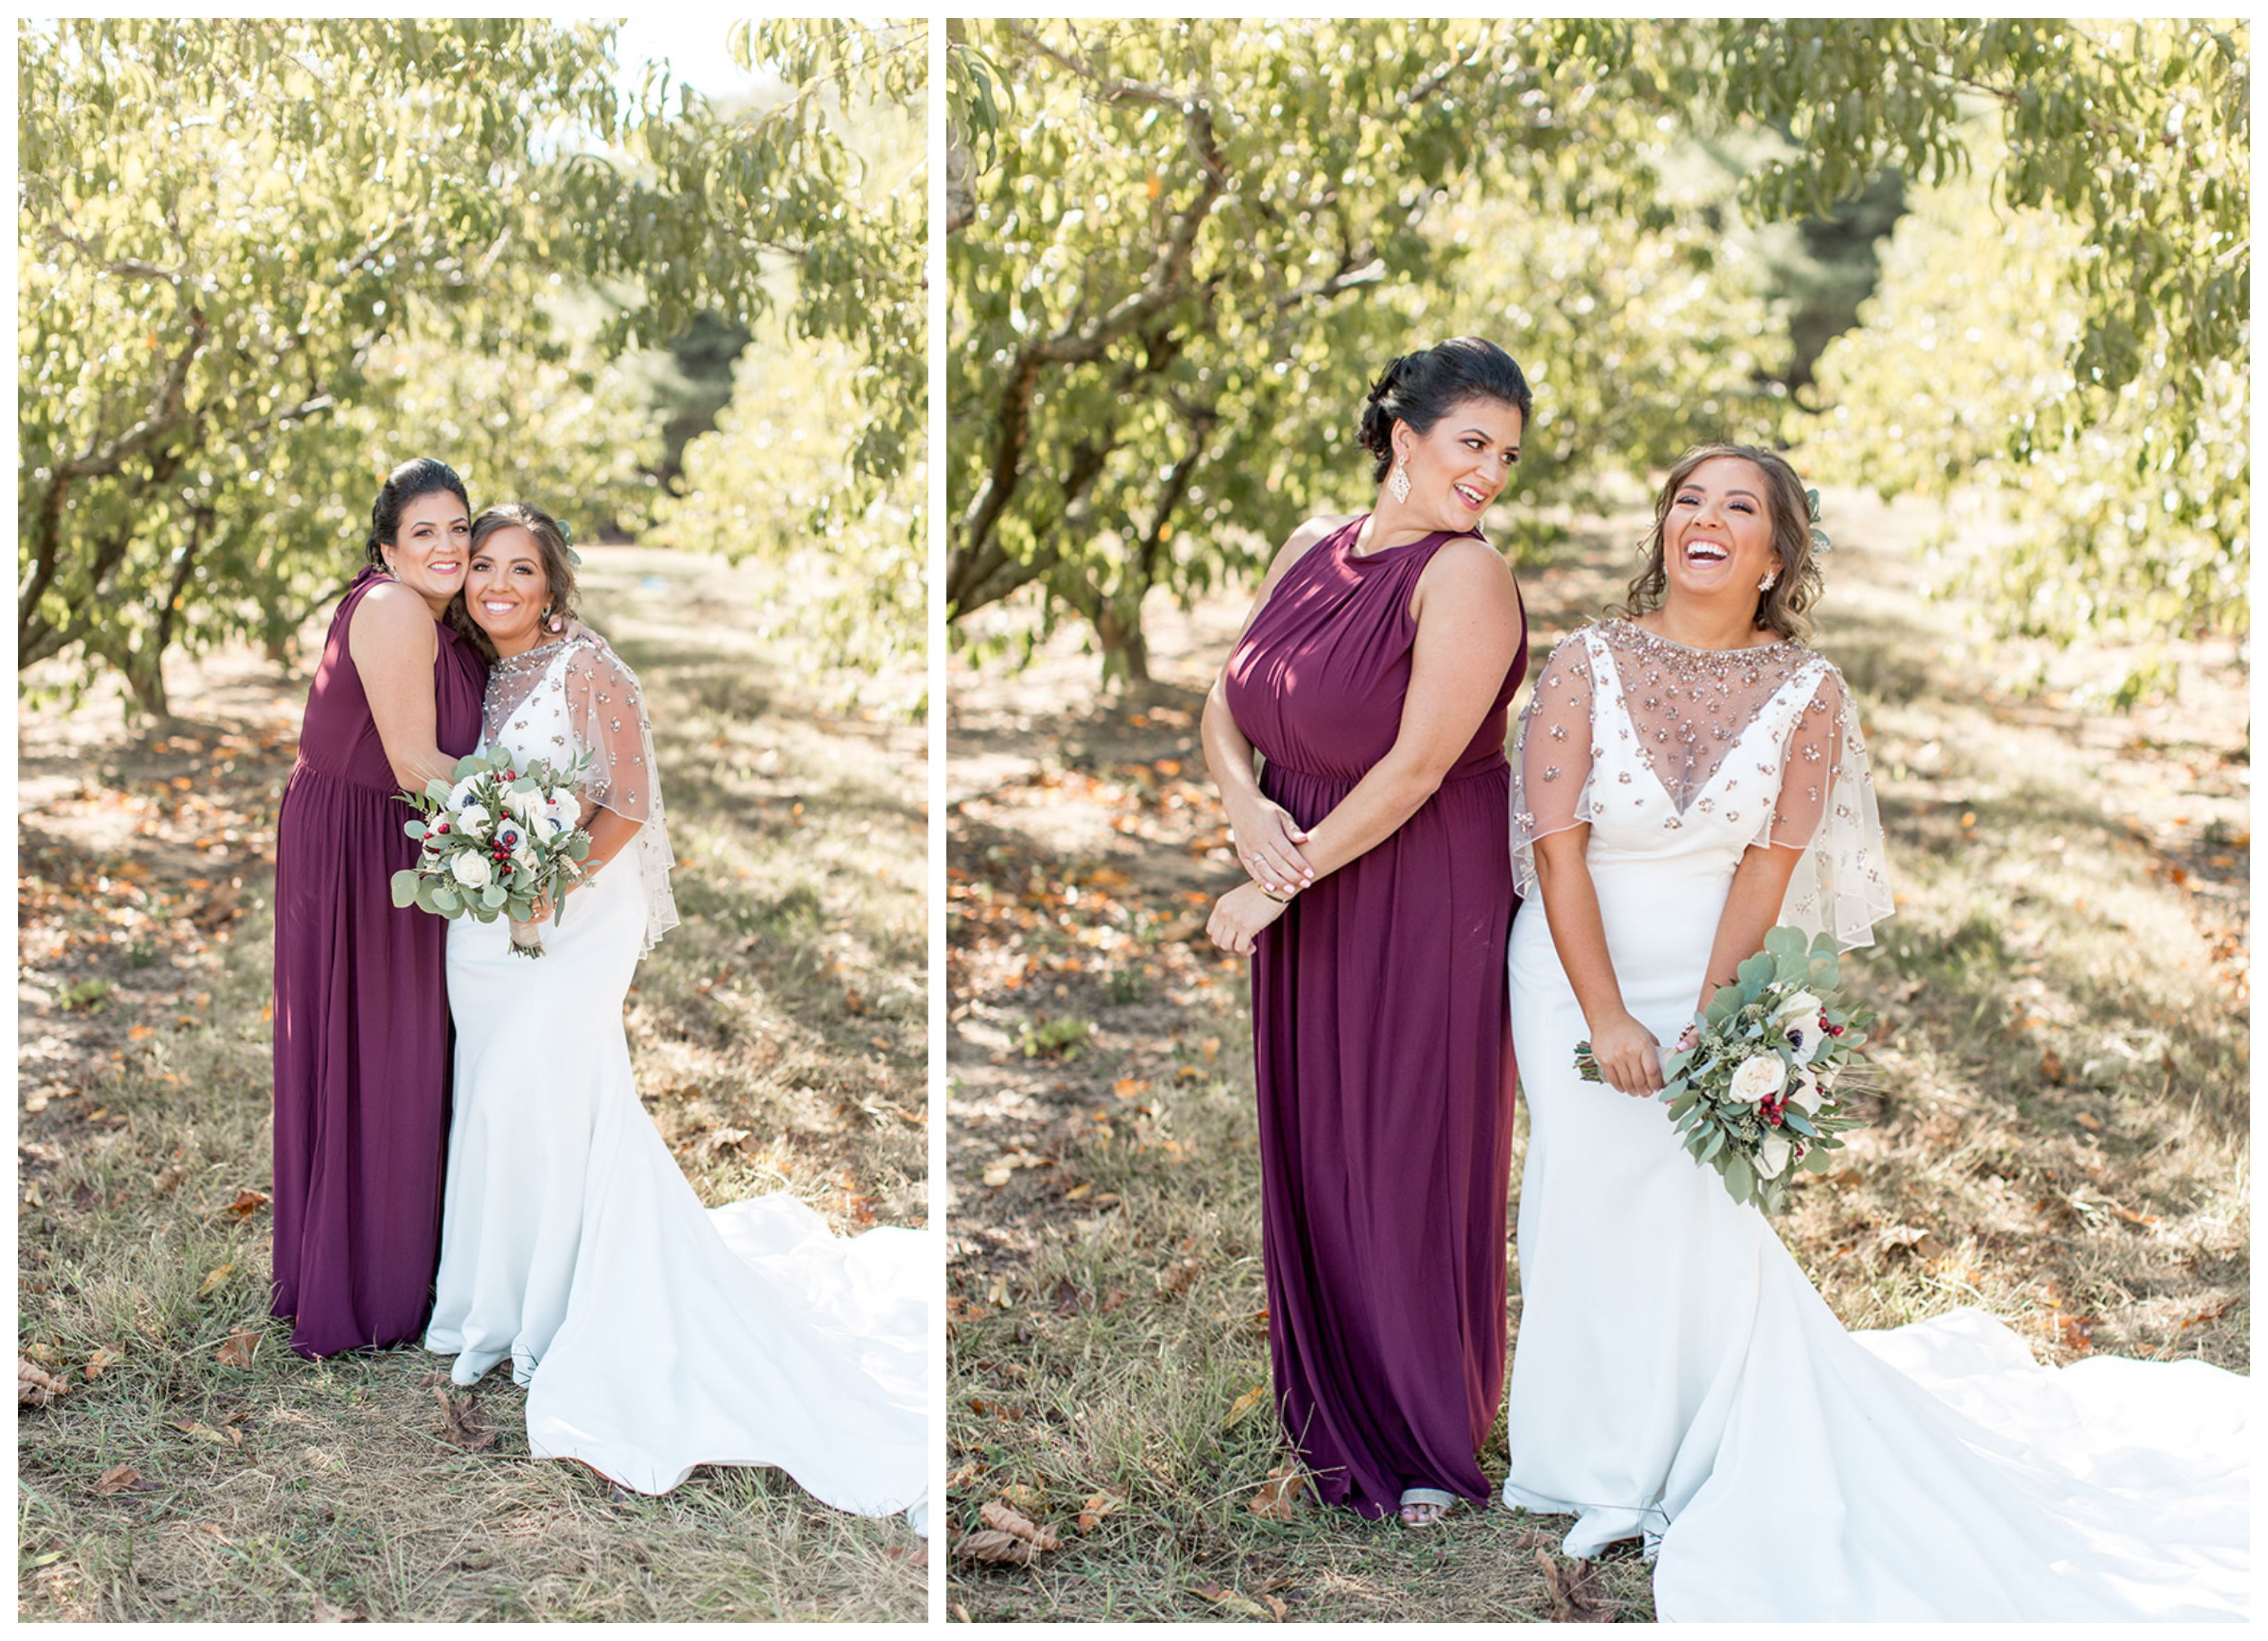 Maid of honor and bride pose for portraits